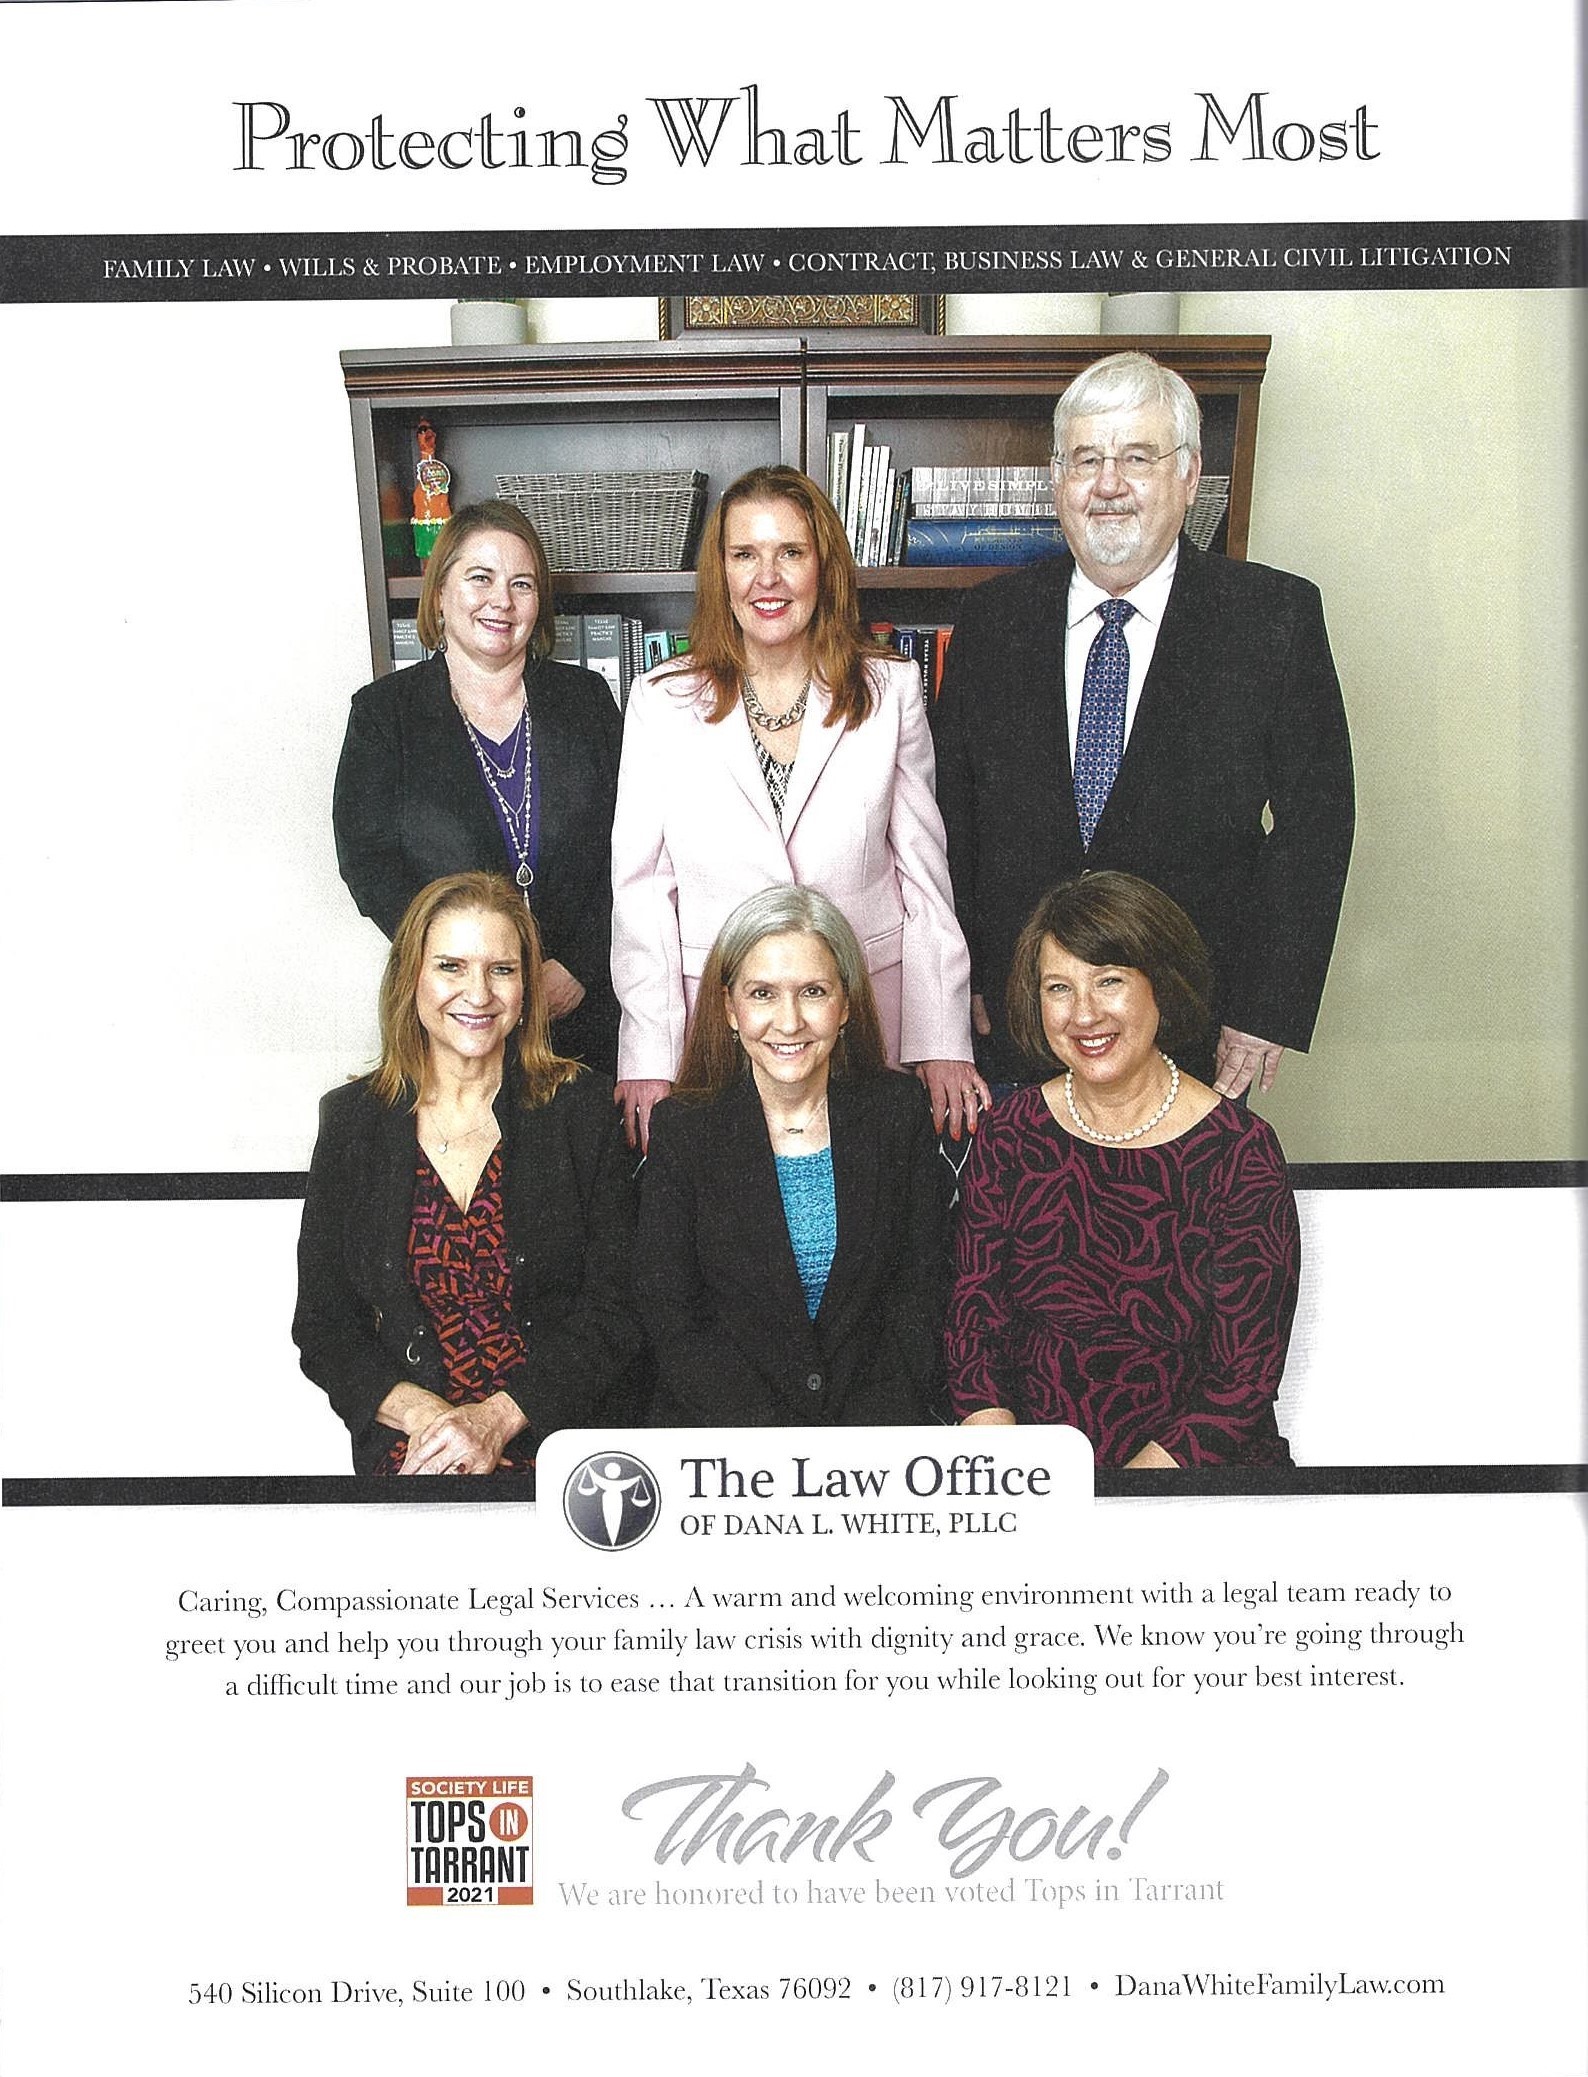 Group photo of The Law Office of Dana L. White, PLLC